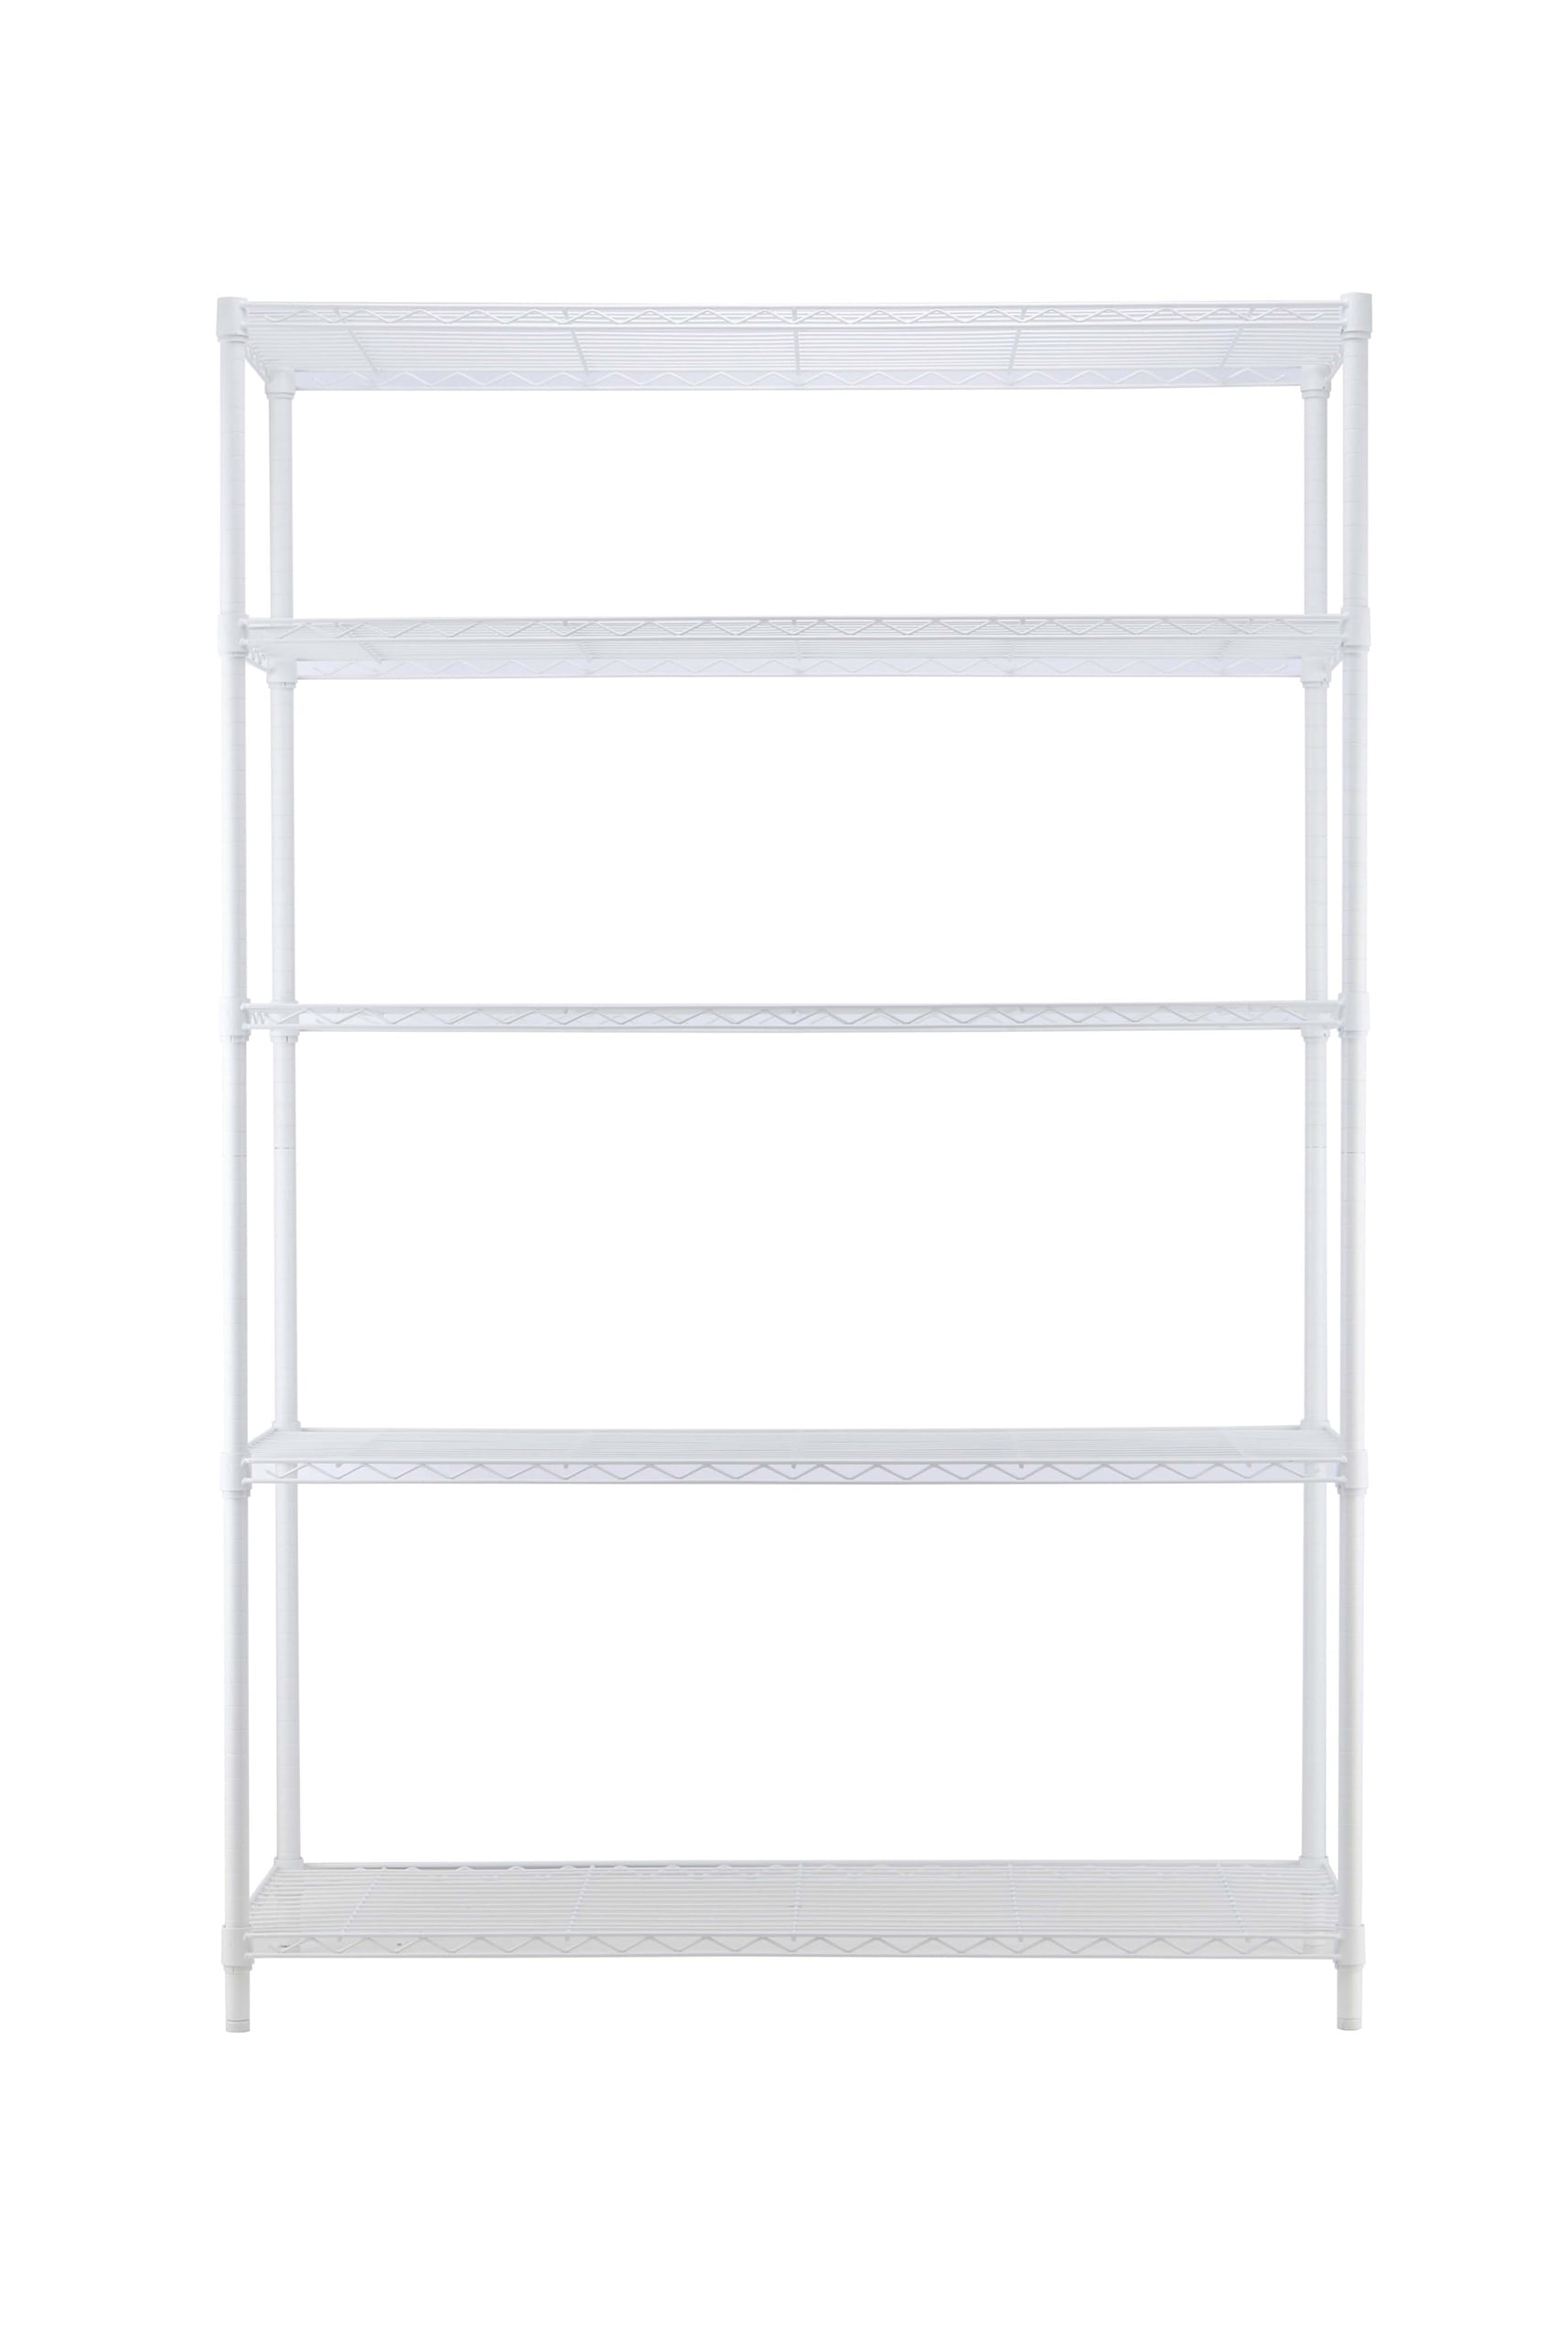 Style Selections Steel 5-Tier Utility Shelving Unit (47.7-in W x